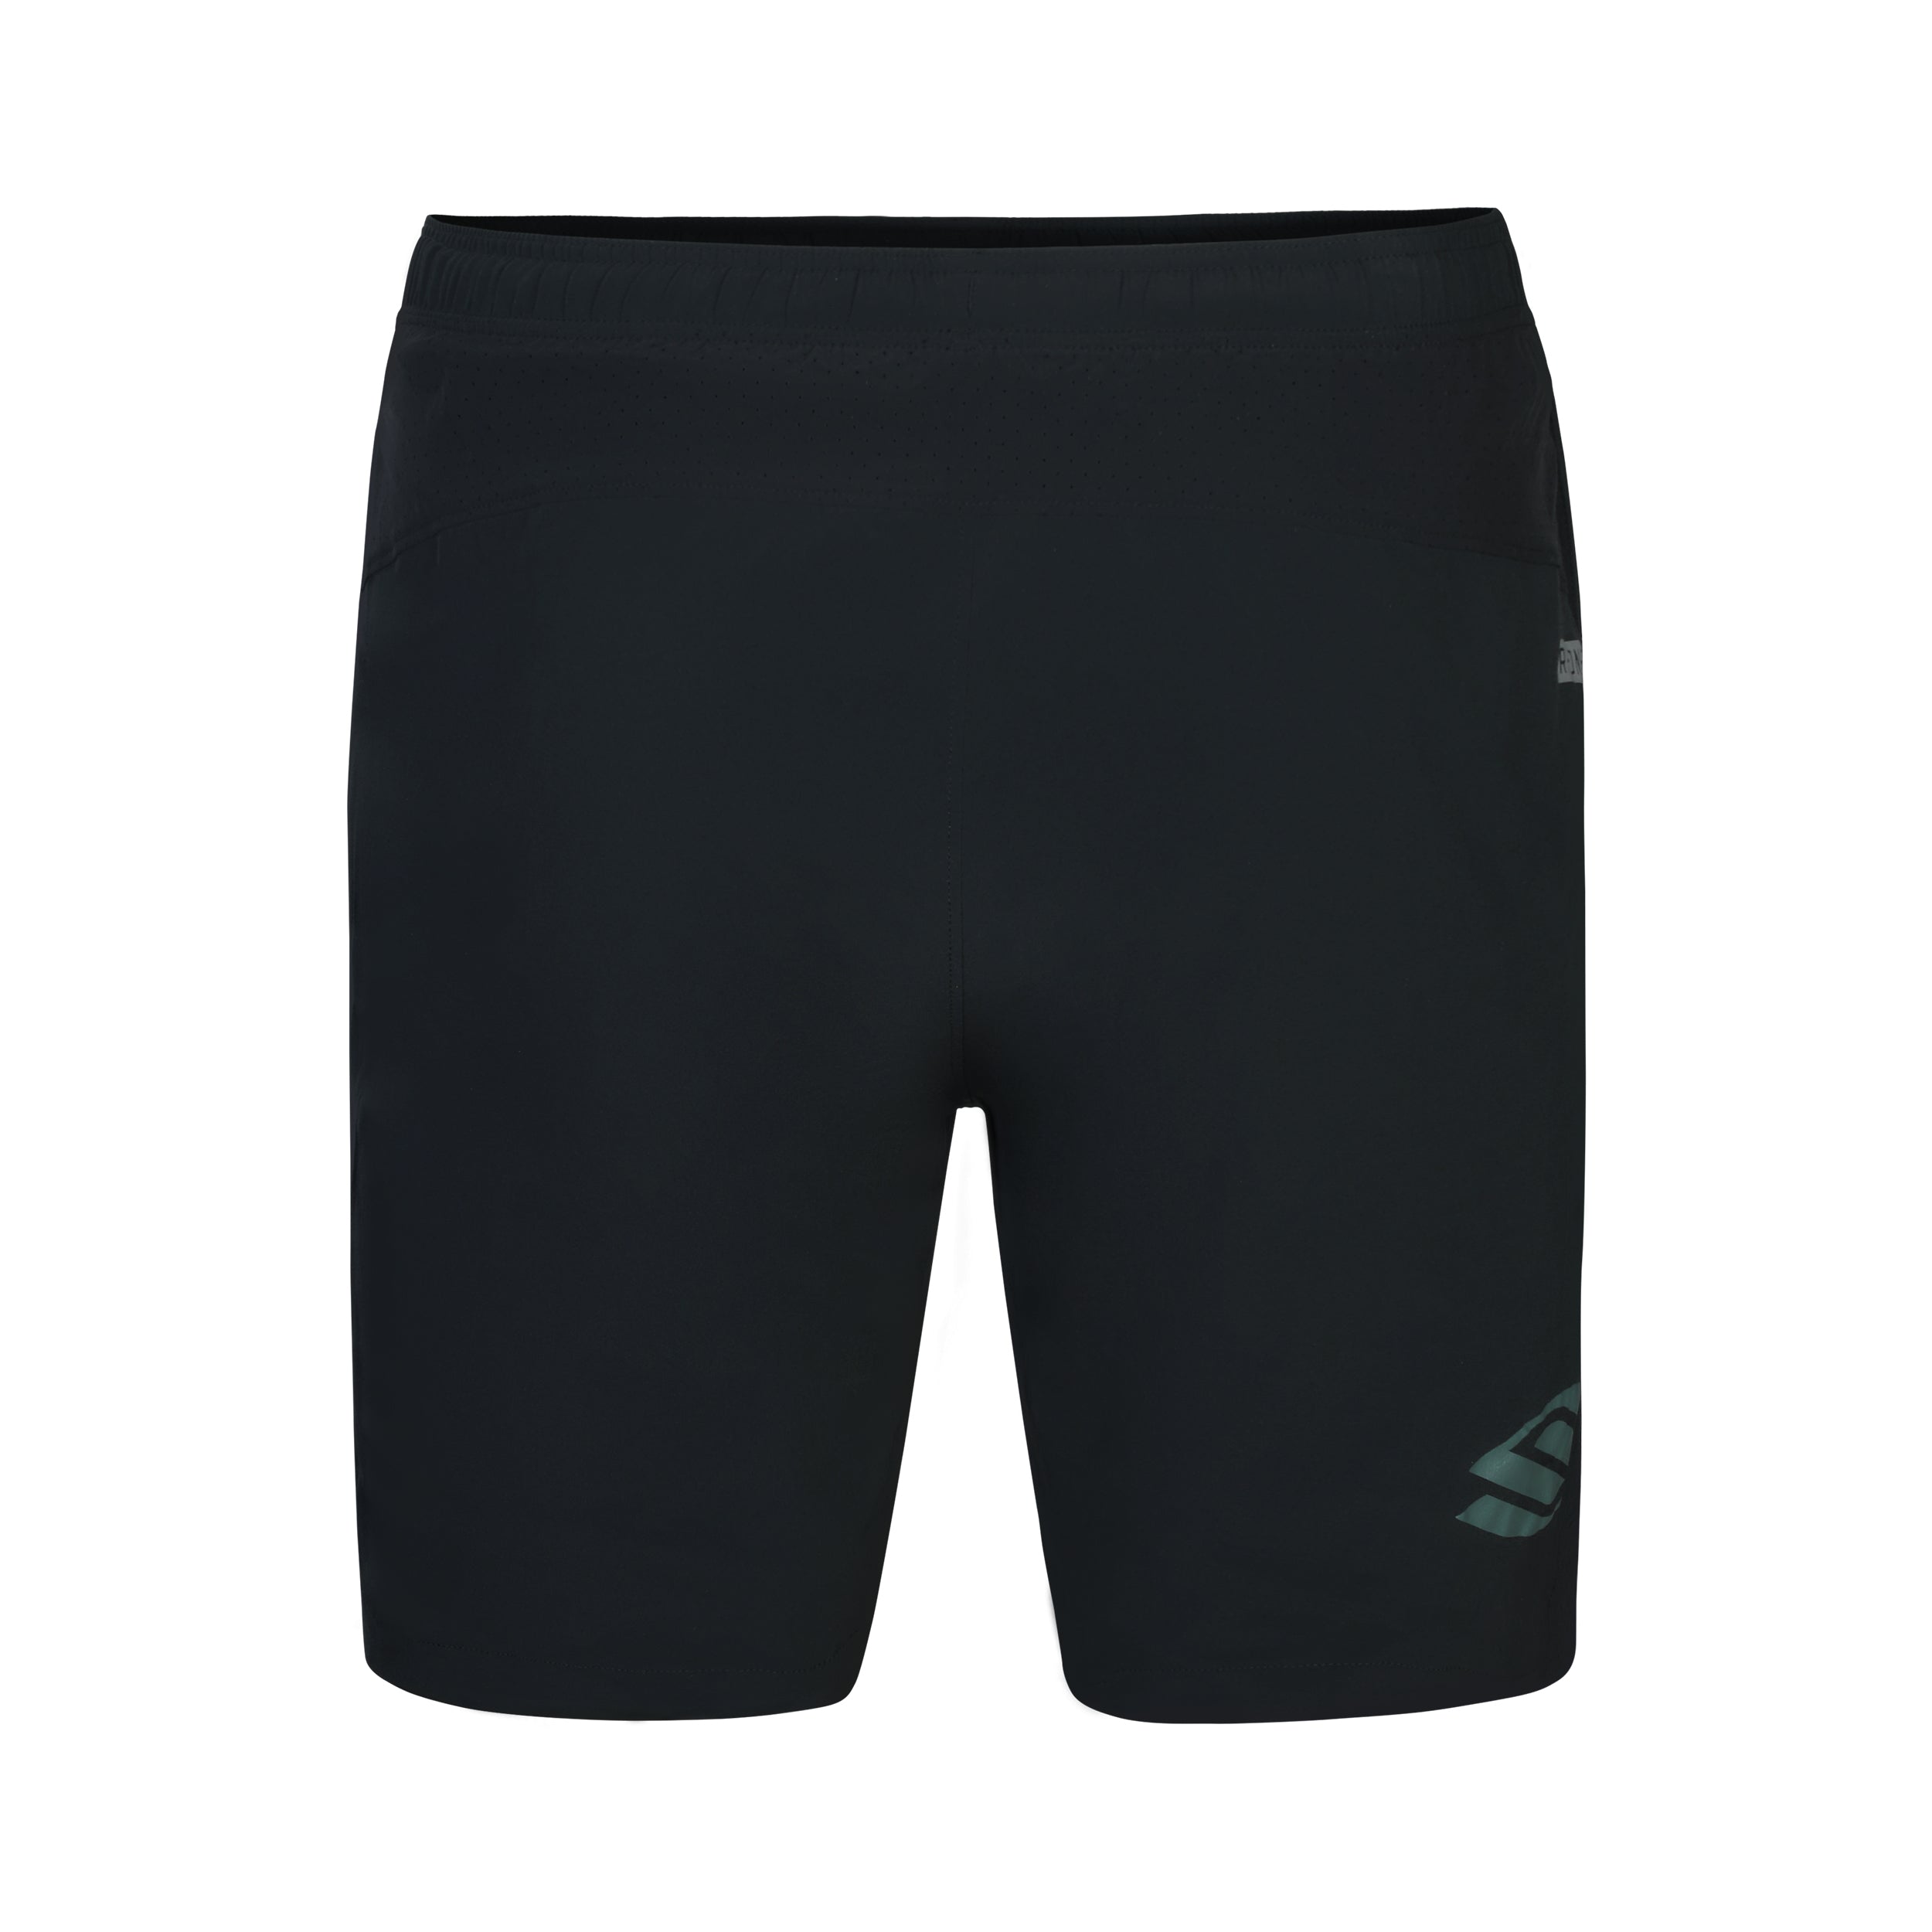 The Selkirk x Rhone Men’s 7” Backspin Lined Shorts in black are designed for performance and comfort on the pickleball court.